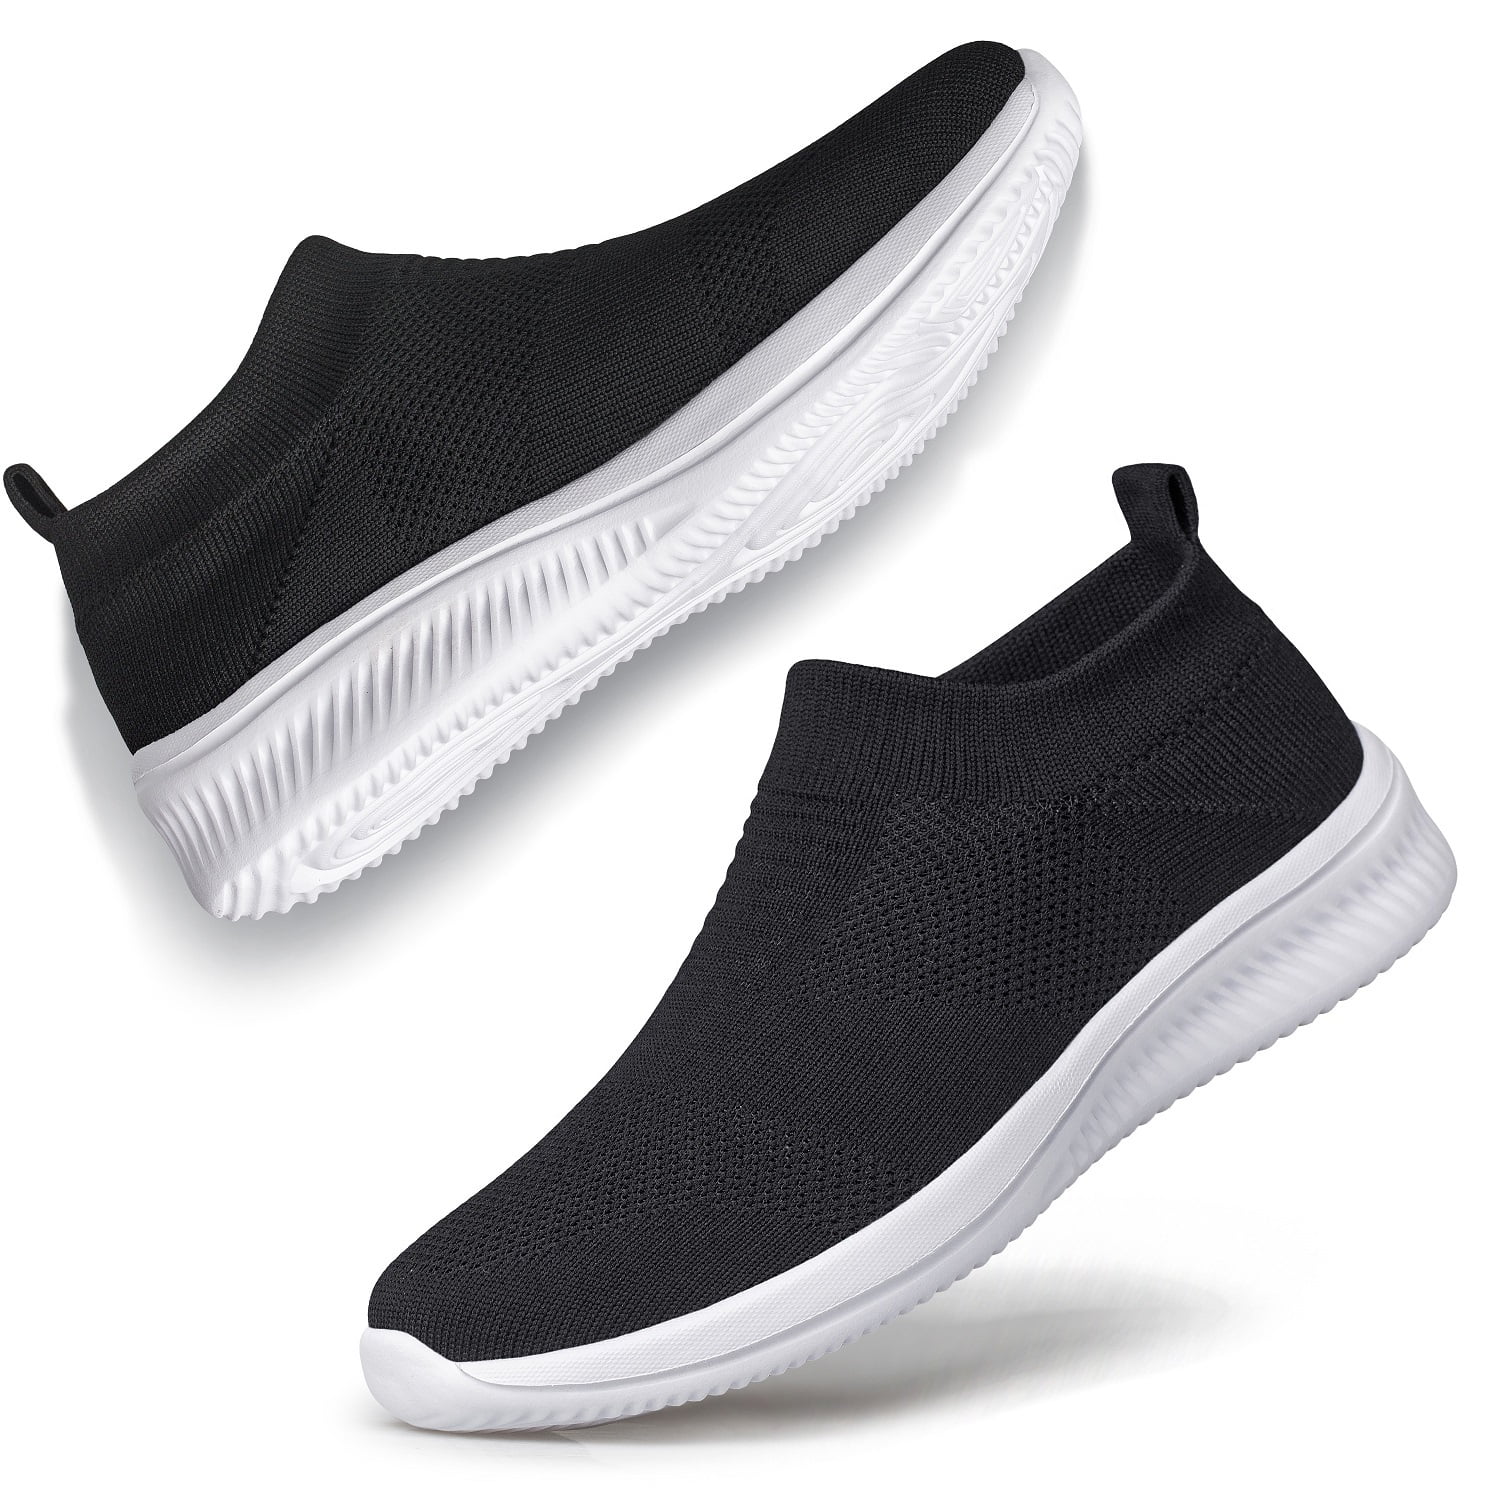 ADQ Women's Slip-on Walking Shoes Casual Flats Athletic Sneakers Black ...